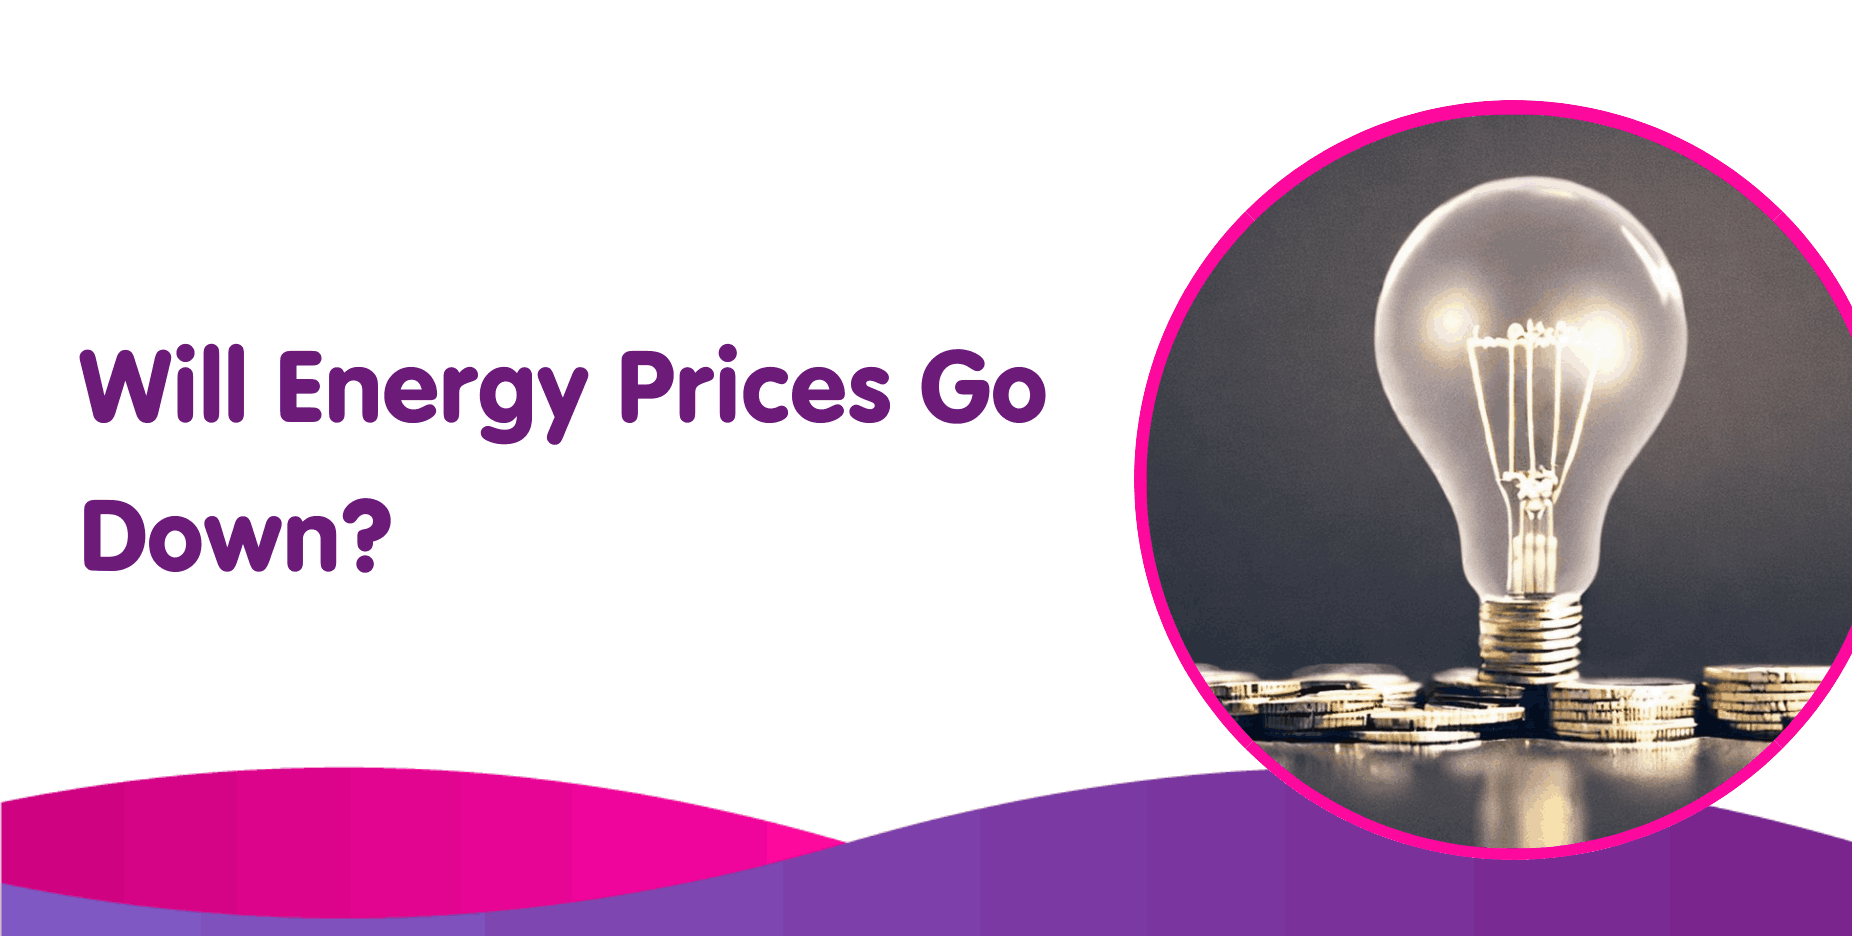 Will Energy Prices Go Down?